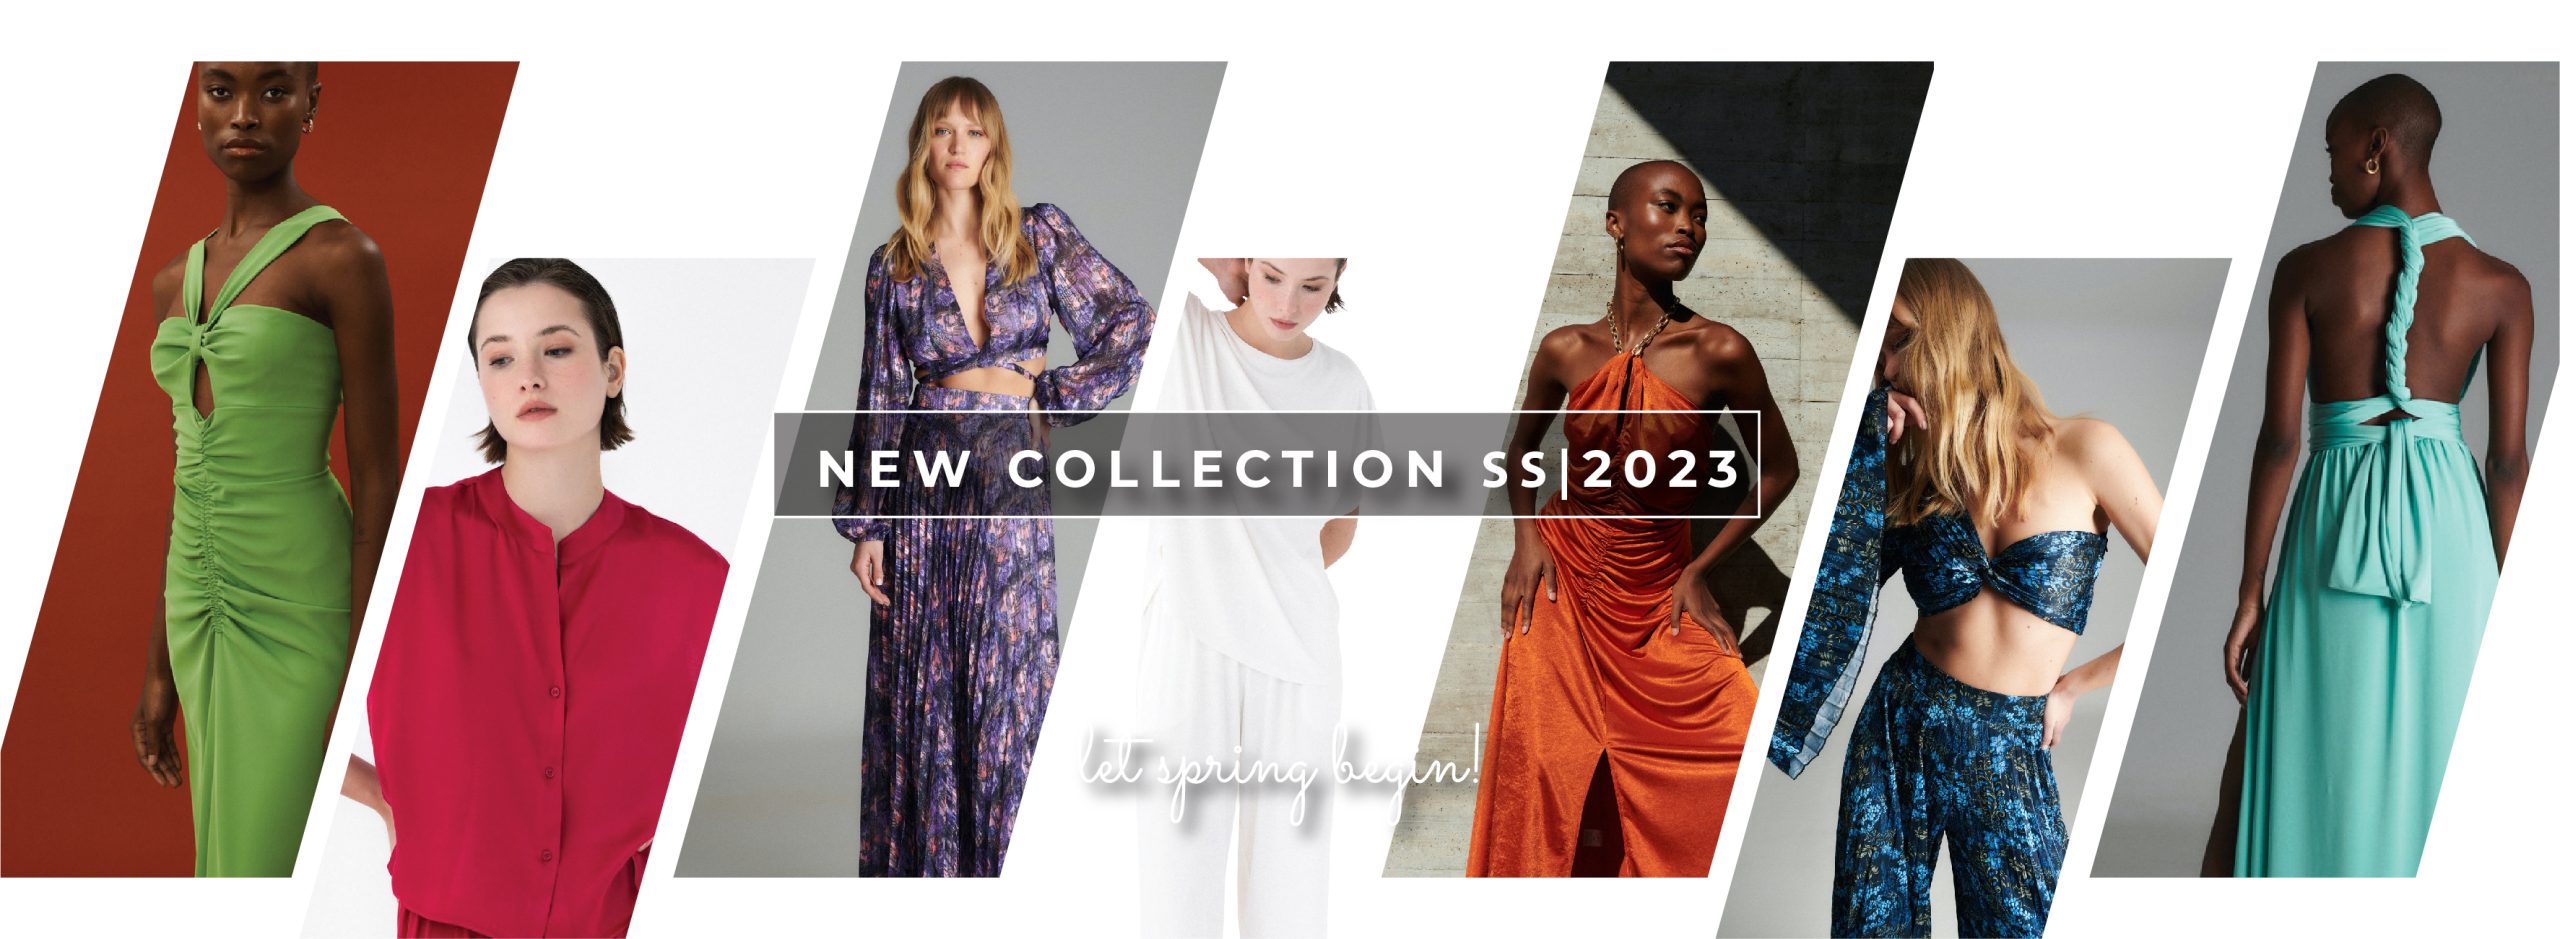 New Collection Spring 2 2023